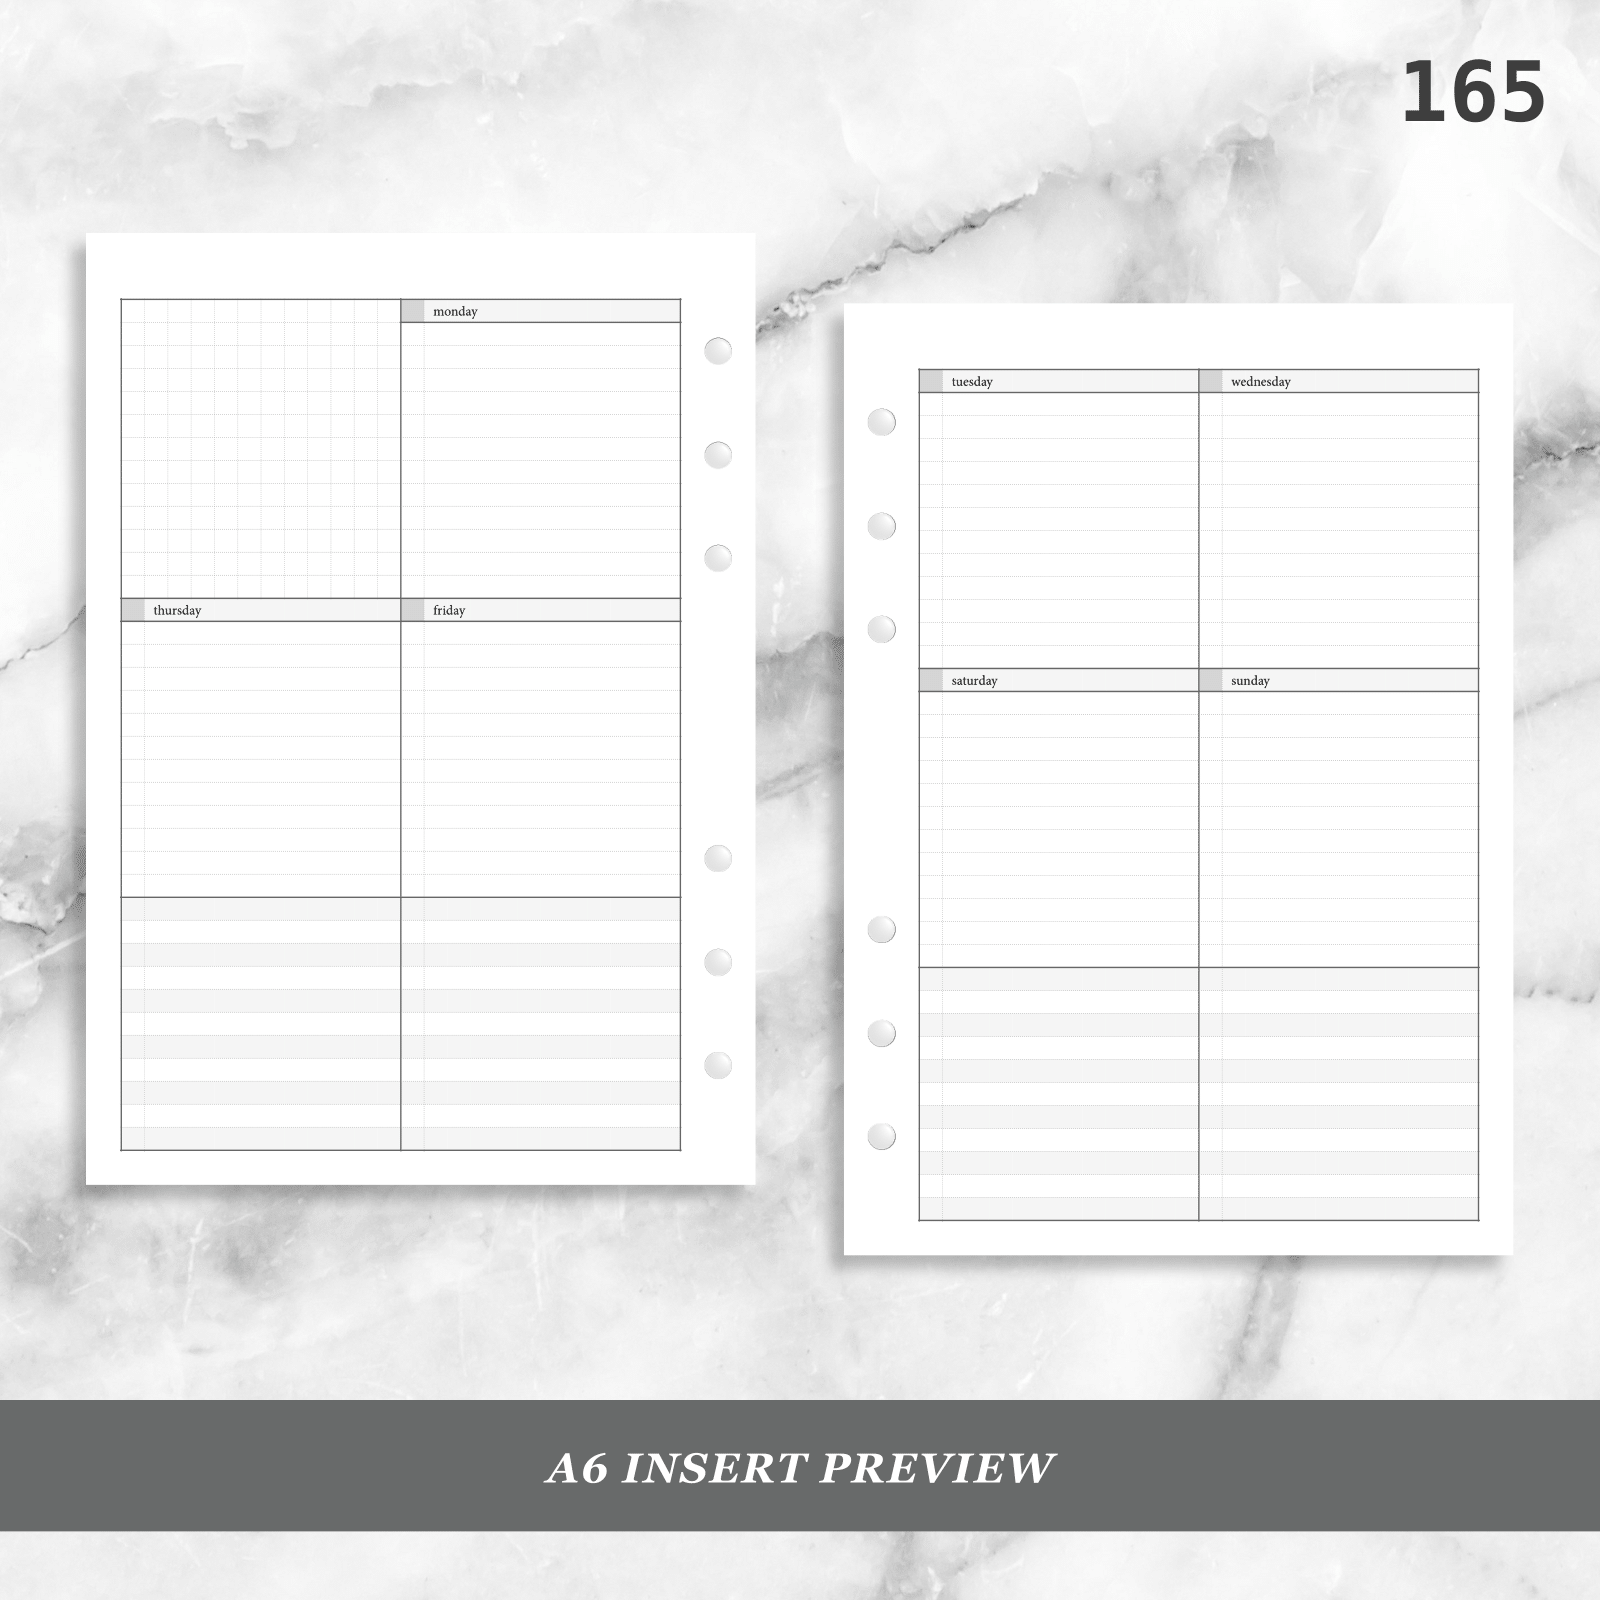 2024 Weekly Dated Printable, Weekly Planner Agenda, Weekly Organizer,  Weekly to Do List for Work/home, WO1P, Download PDF, Filofax A5 